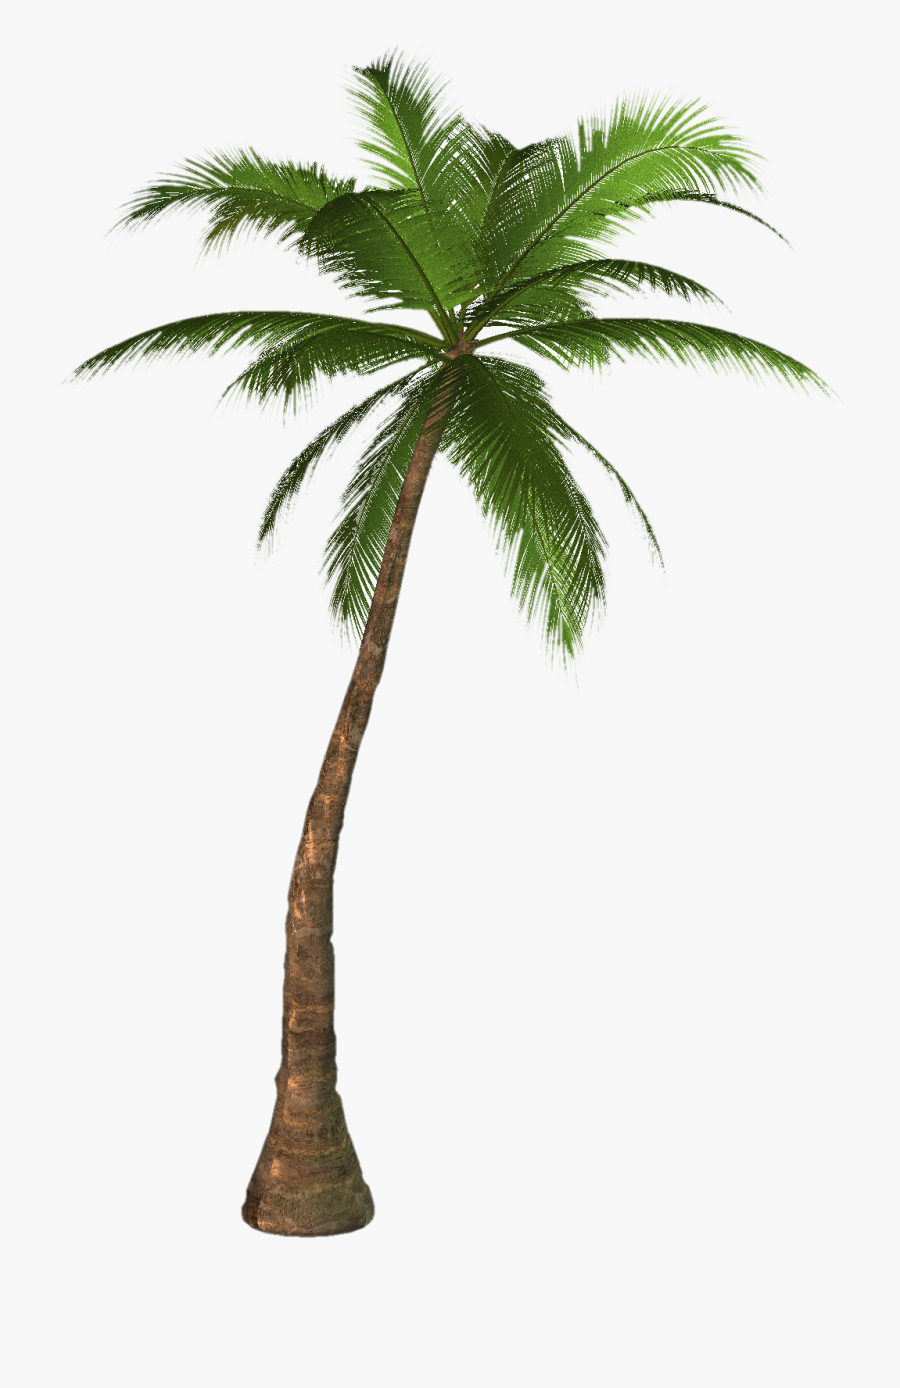 Free Palm Tree Photo, Download Free Clip Art, Free - Palm Tree No Background, Transparent Clipart